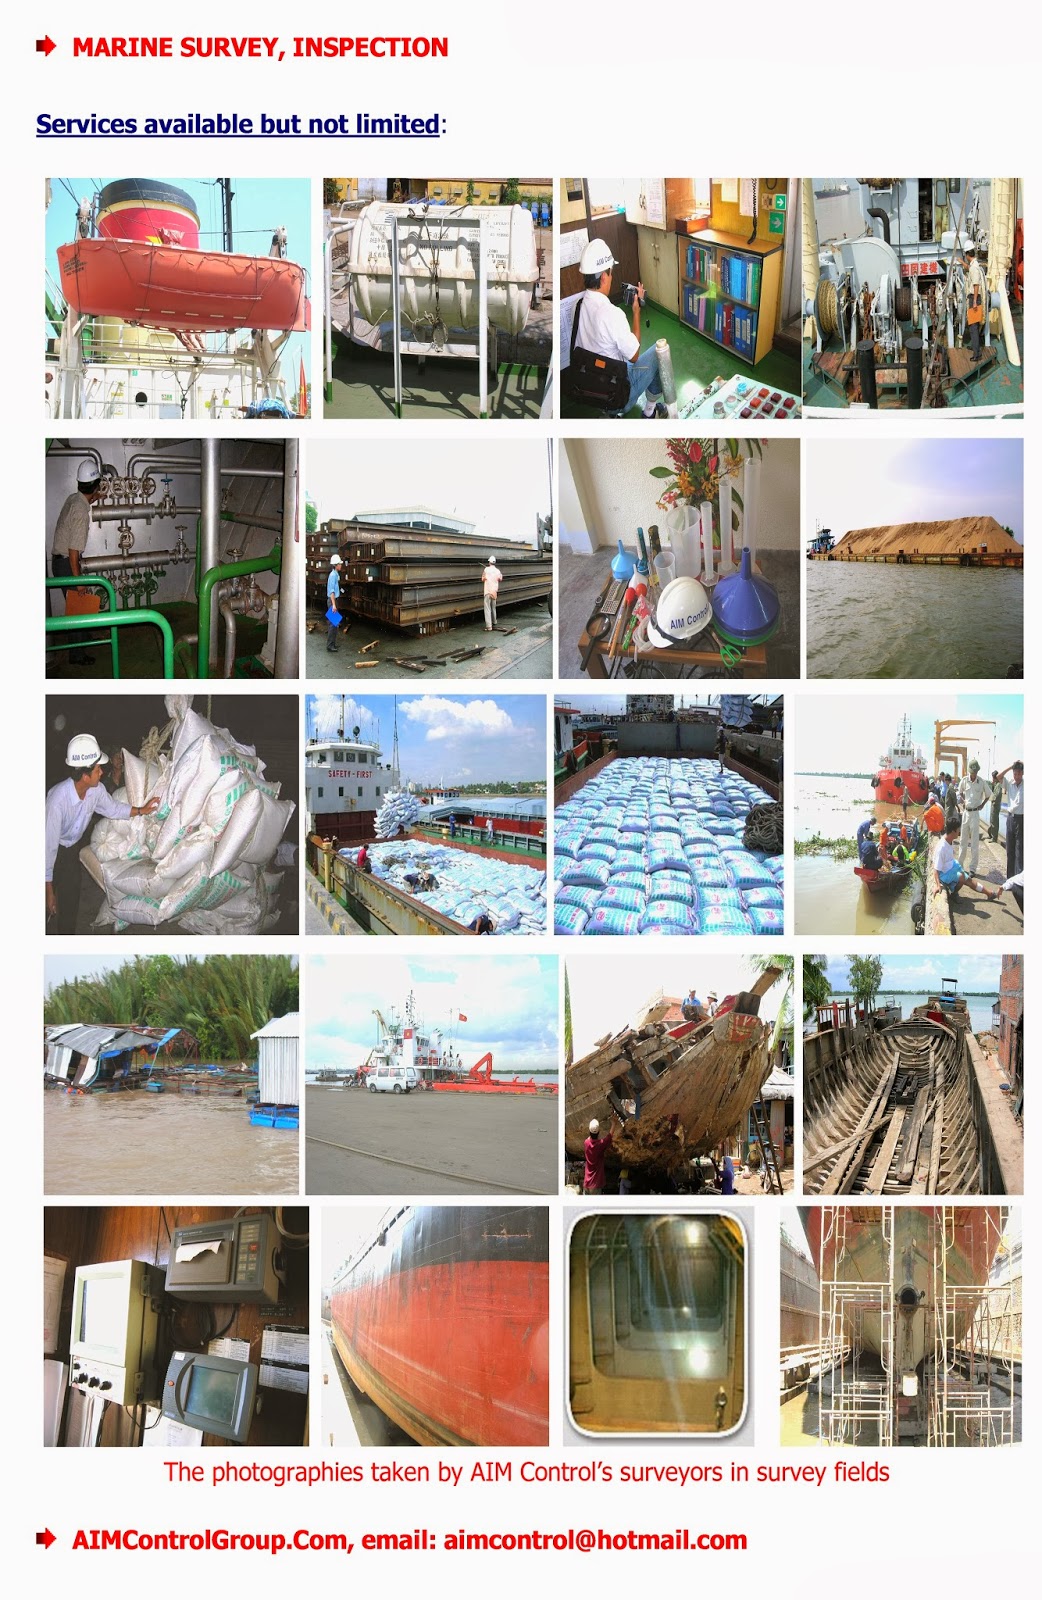 expert quality control inspection and Marine survey consultant services. http://www.aimcontrolgroup.com